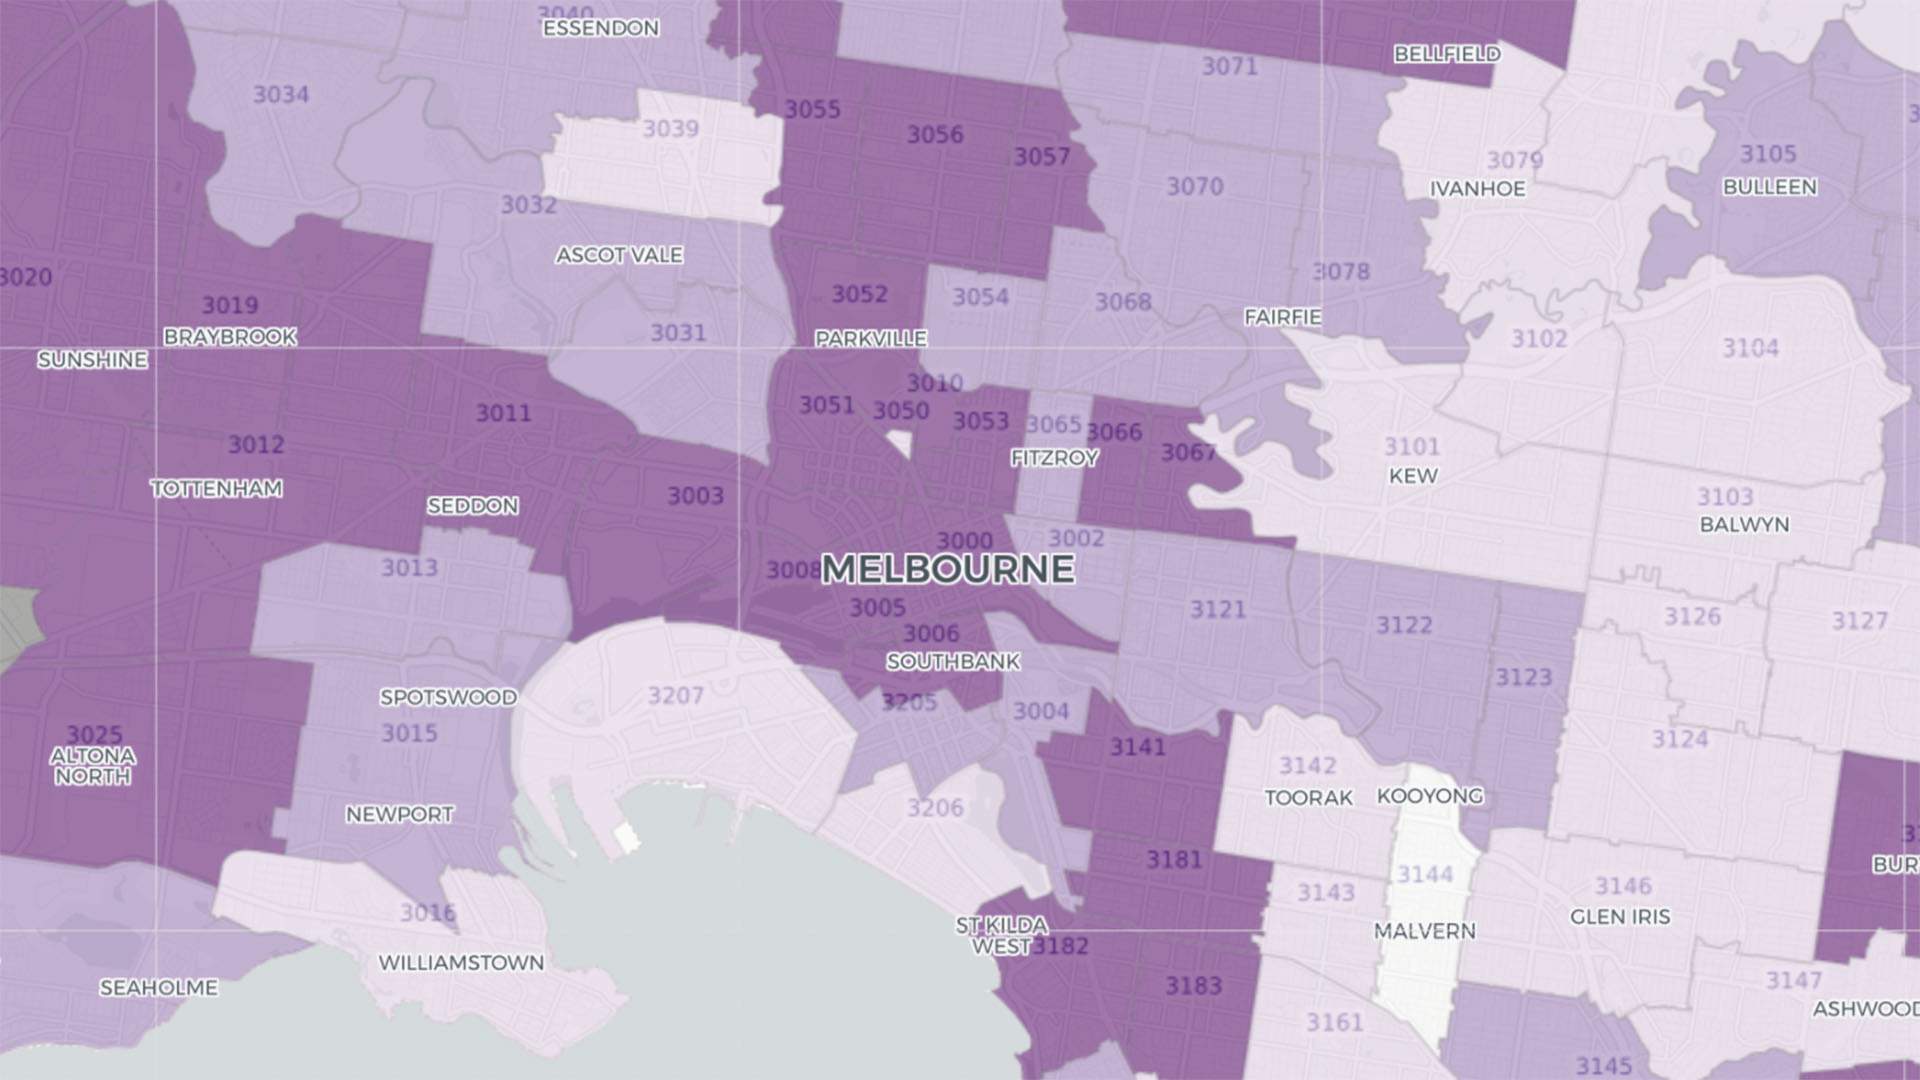 This Helpful Interactive Map Shows Victoria's COVID-19 Vaccination Rates by Postcode